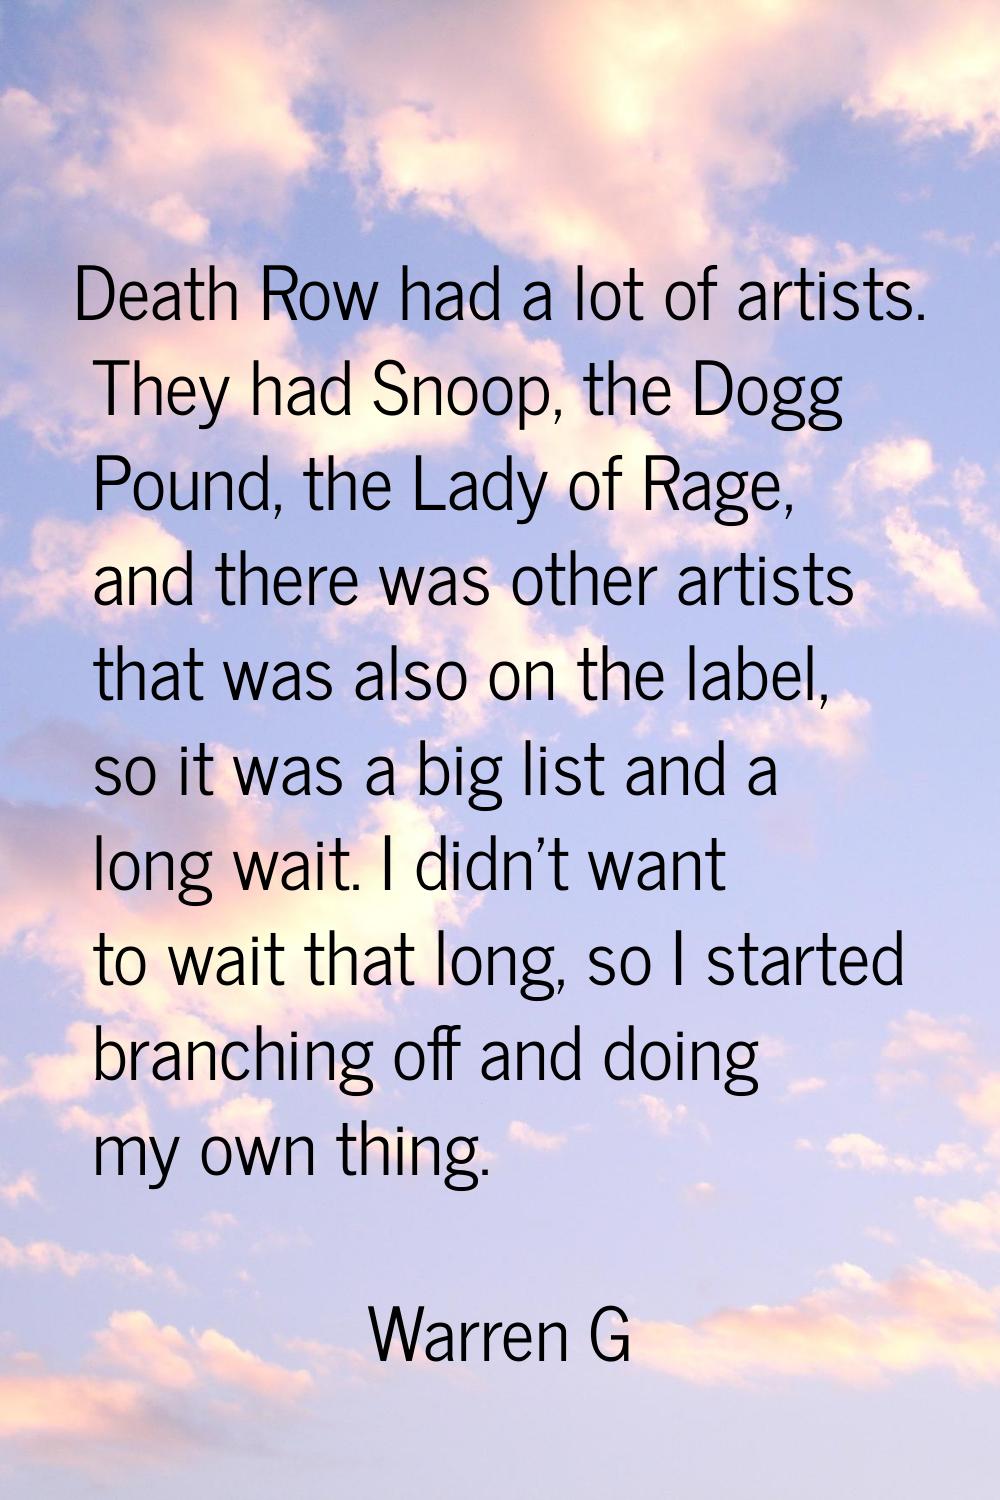 Death Row had a lot of artists. They had Snoop, the Dogg Pound, the Lady of Rage, and there was oth